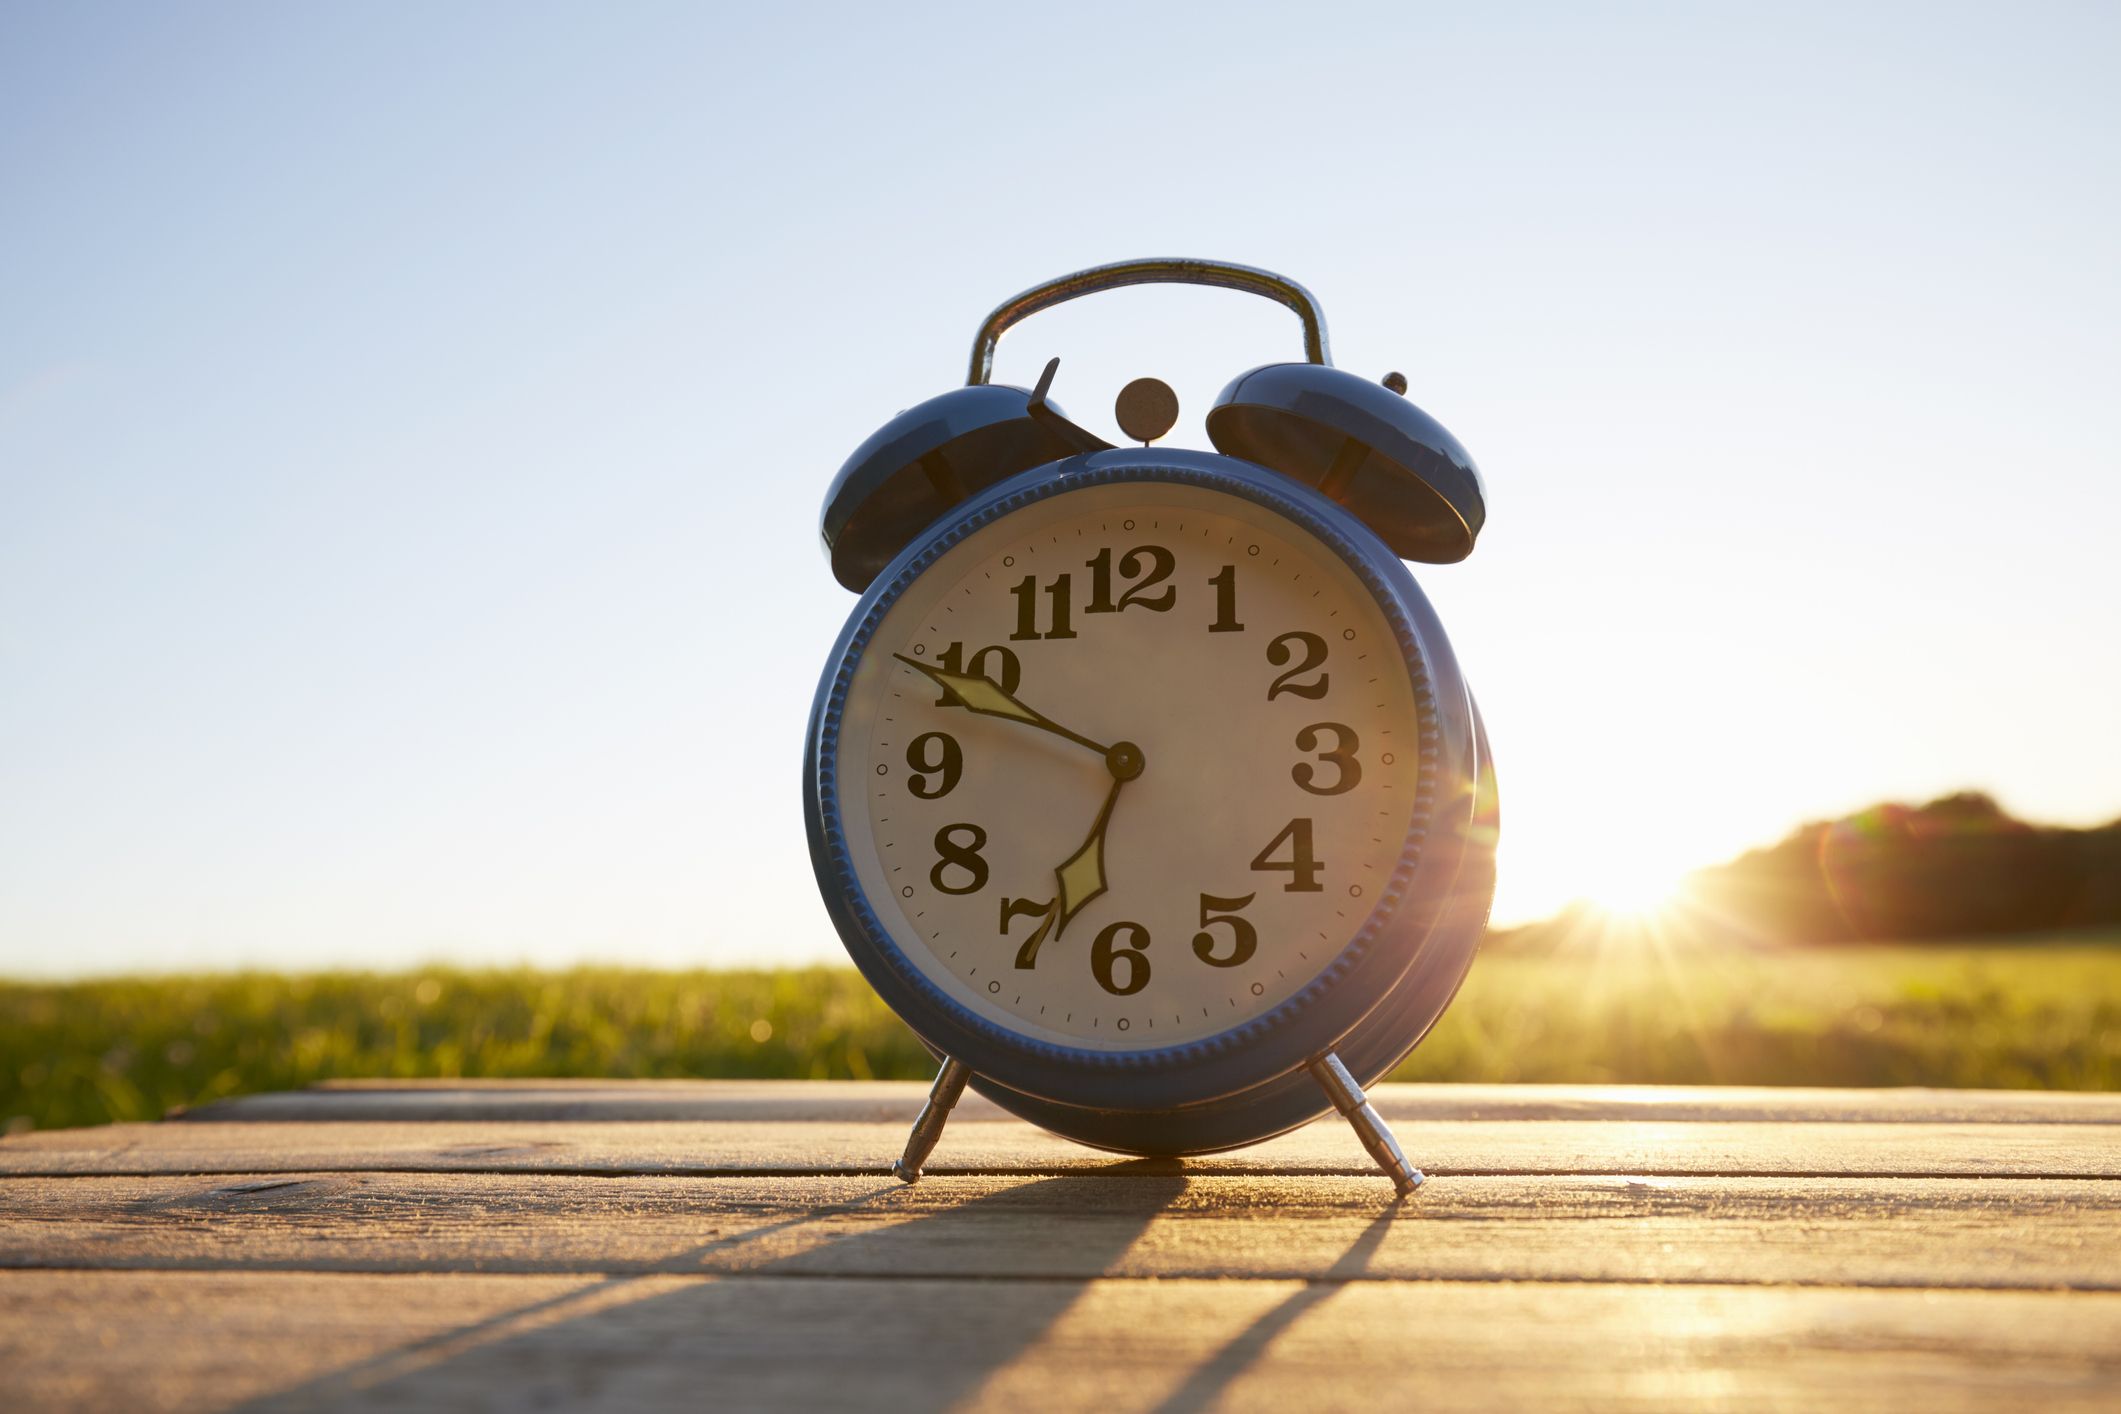 When Is Saving Time? Here's What About Seasonal Clock Change